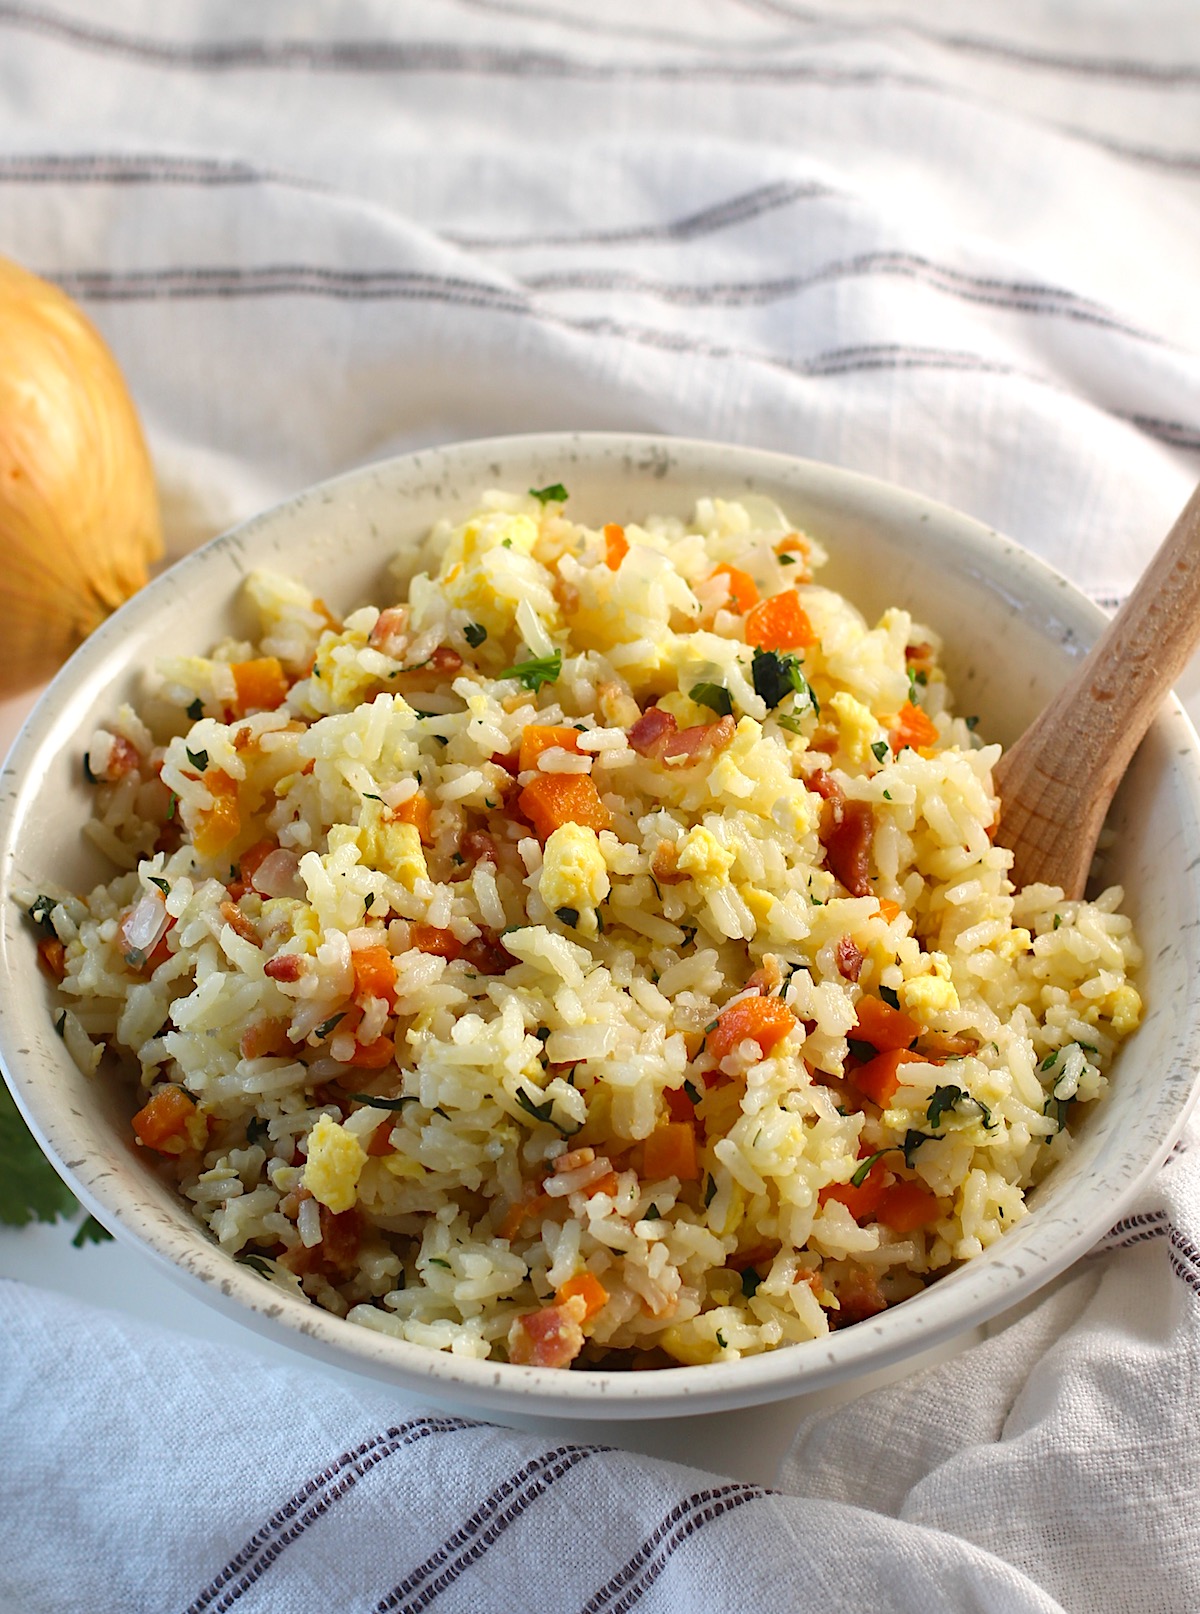 Arroz pilaf in a bowl with carrots, bacon, and cilantro mixed in and a spoon in the bowl.